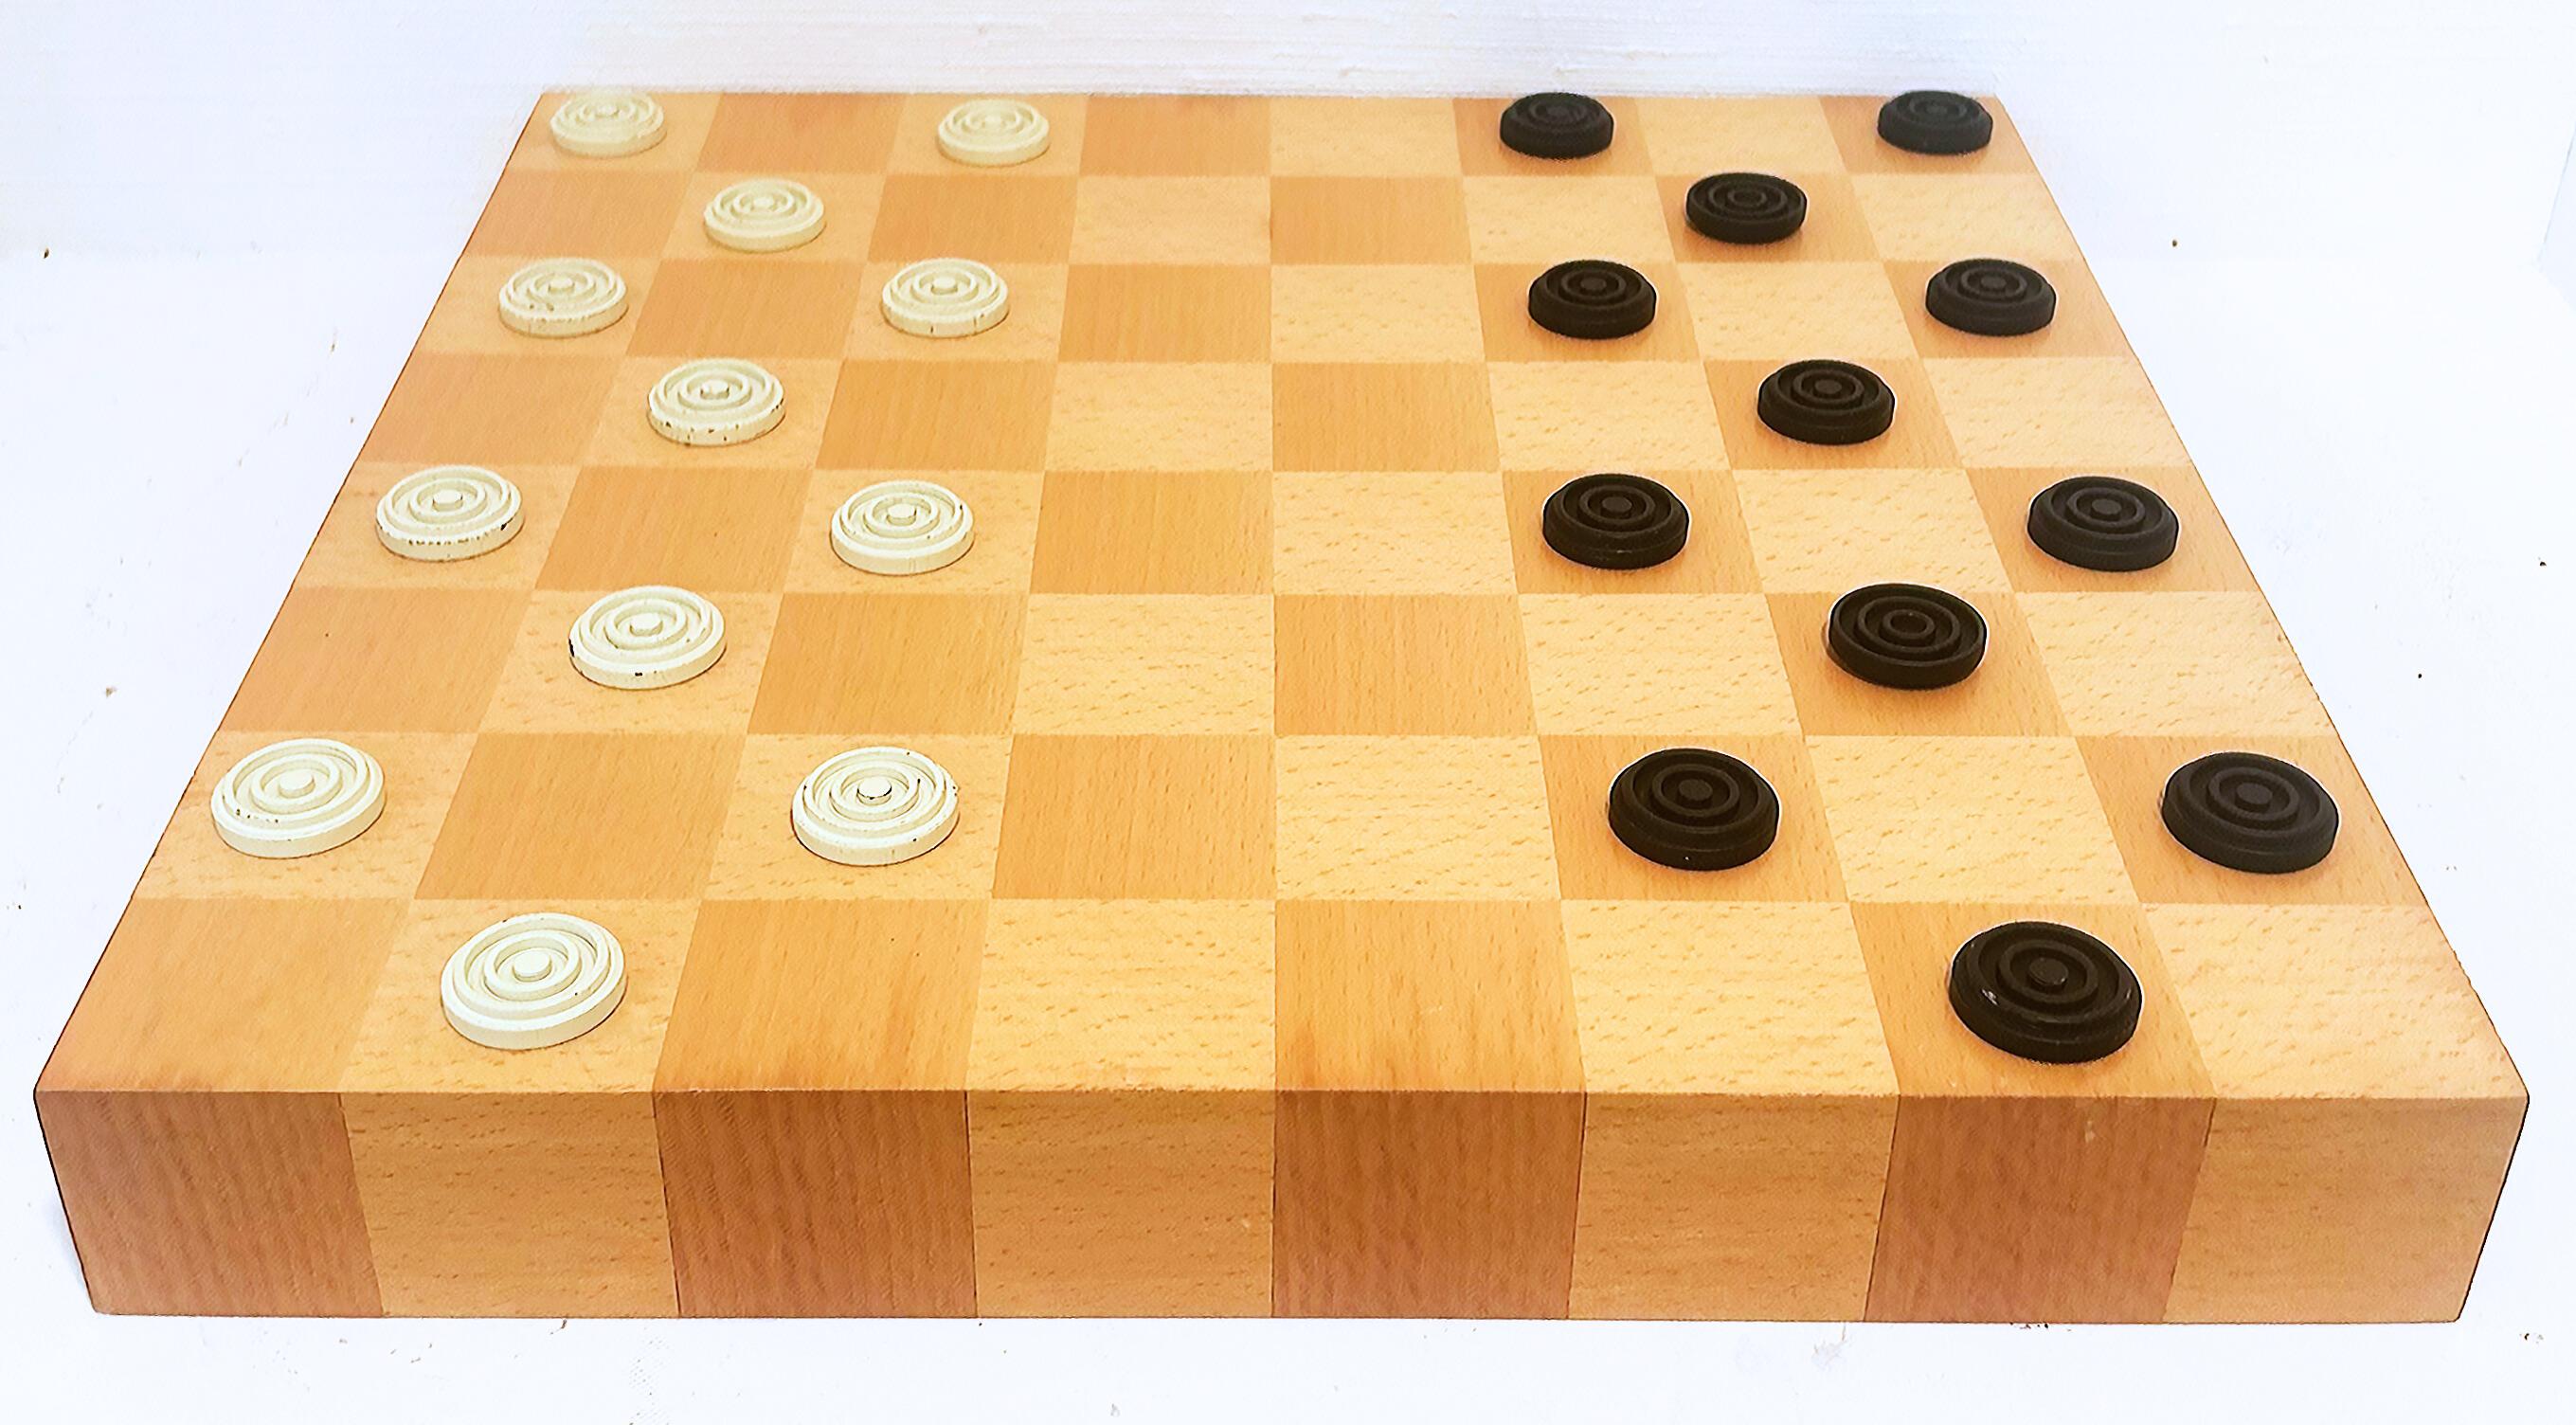 Epoxy Resin Michael Graves Post-modern Chess / Checkers Set Board Game and Pieces For Sale